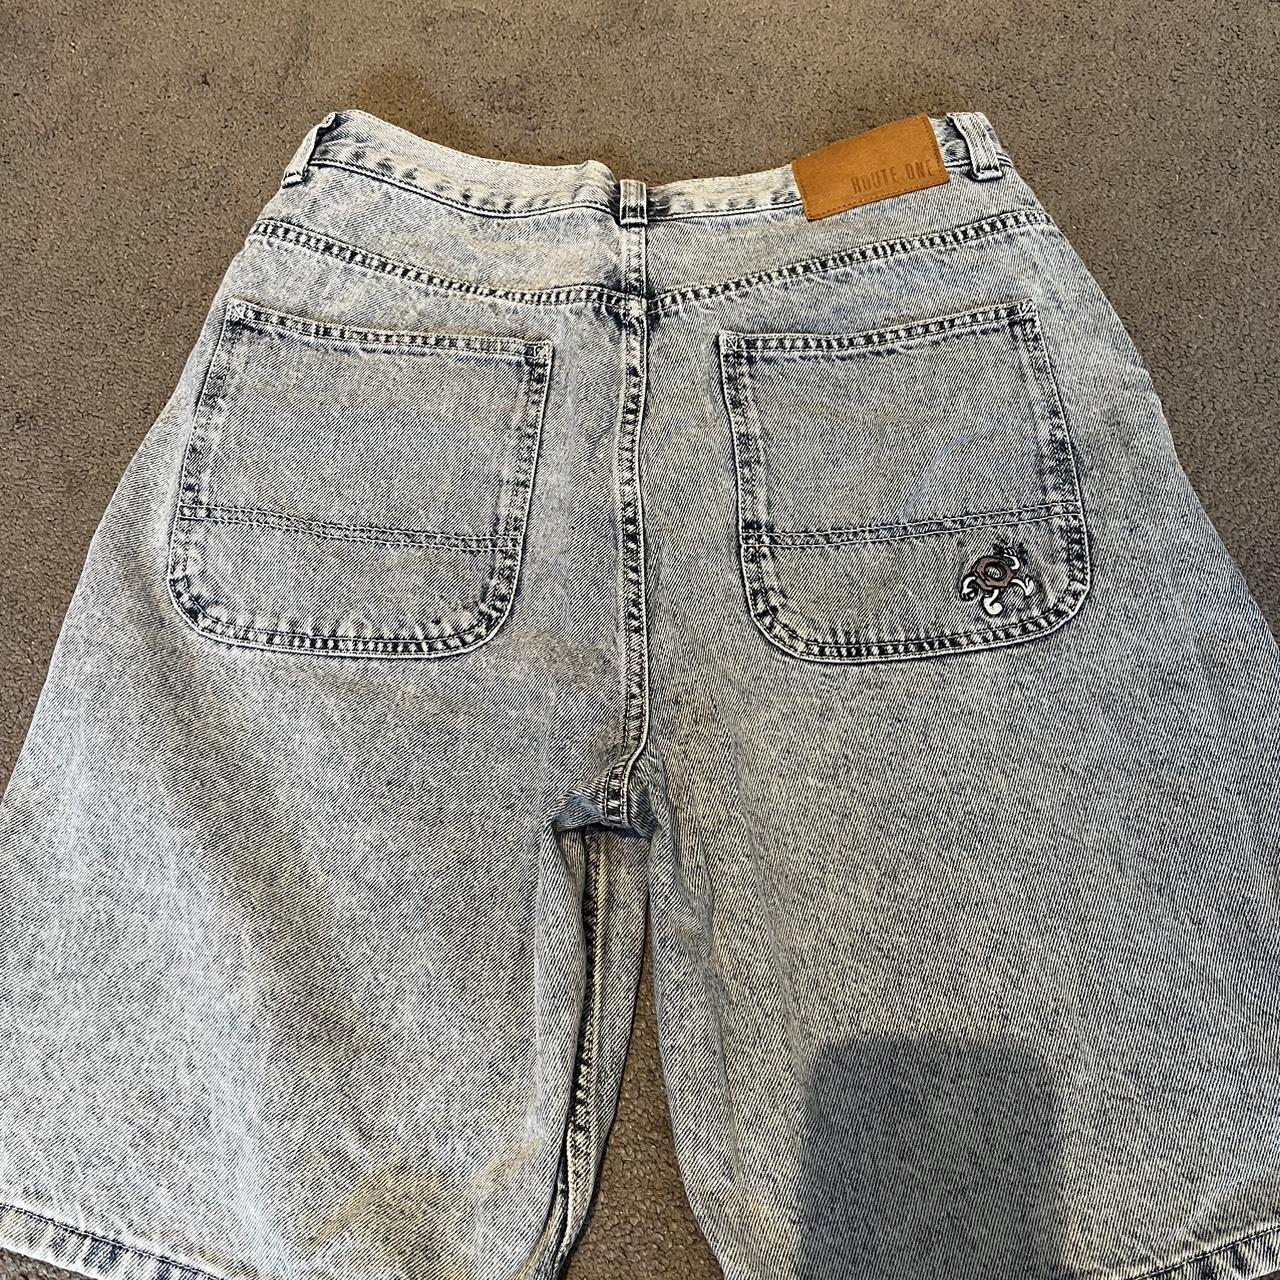 route one baggy jorts only worn a few times perfect... - Depop